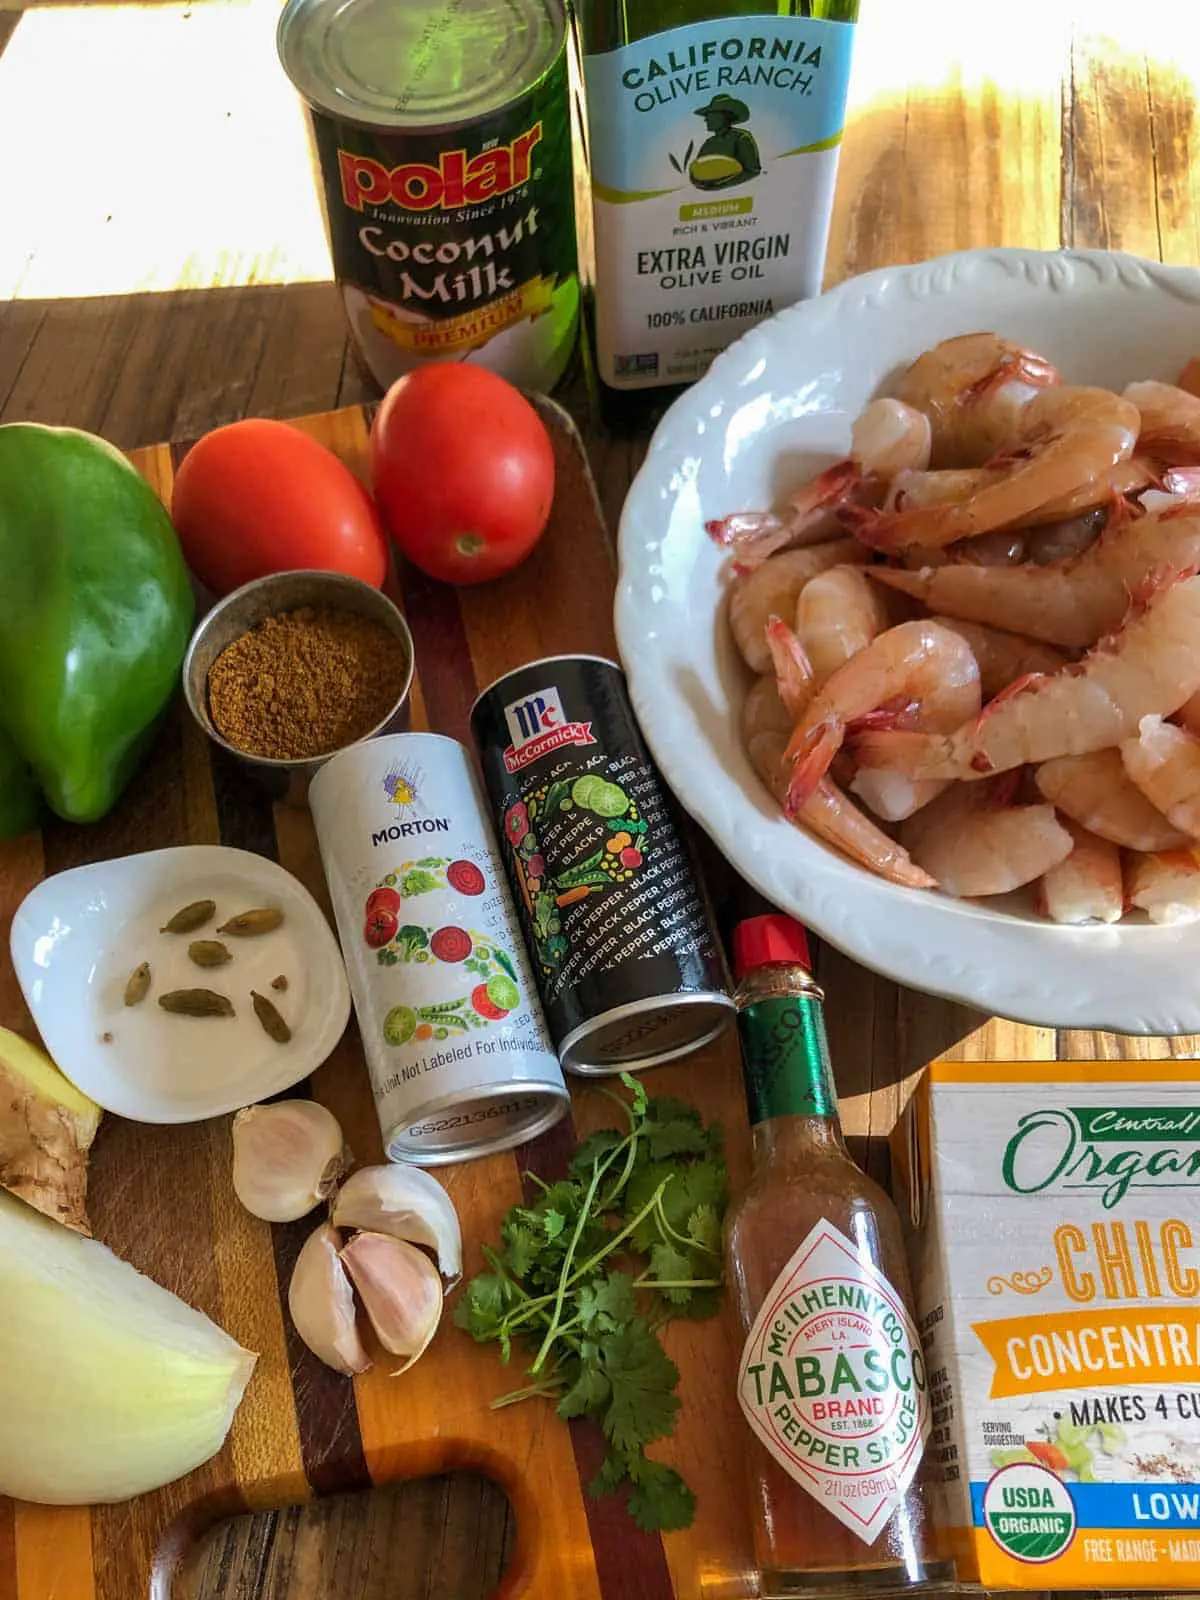 Can of coconut milk, bottle of olive oil, white bowl filled with uncooked shrimp, box of chicken broth, bottle of Tabasco sauce, cilantro, 4 cloves of garlic, salt and pepper, onion, ginger, cardamom pods on a white dish, green bell pepper, garam masala in a silver dish, 2 roma tomatoes.